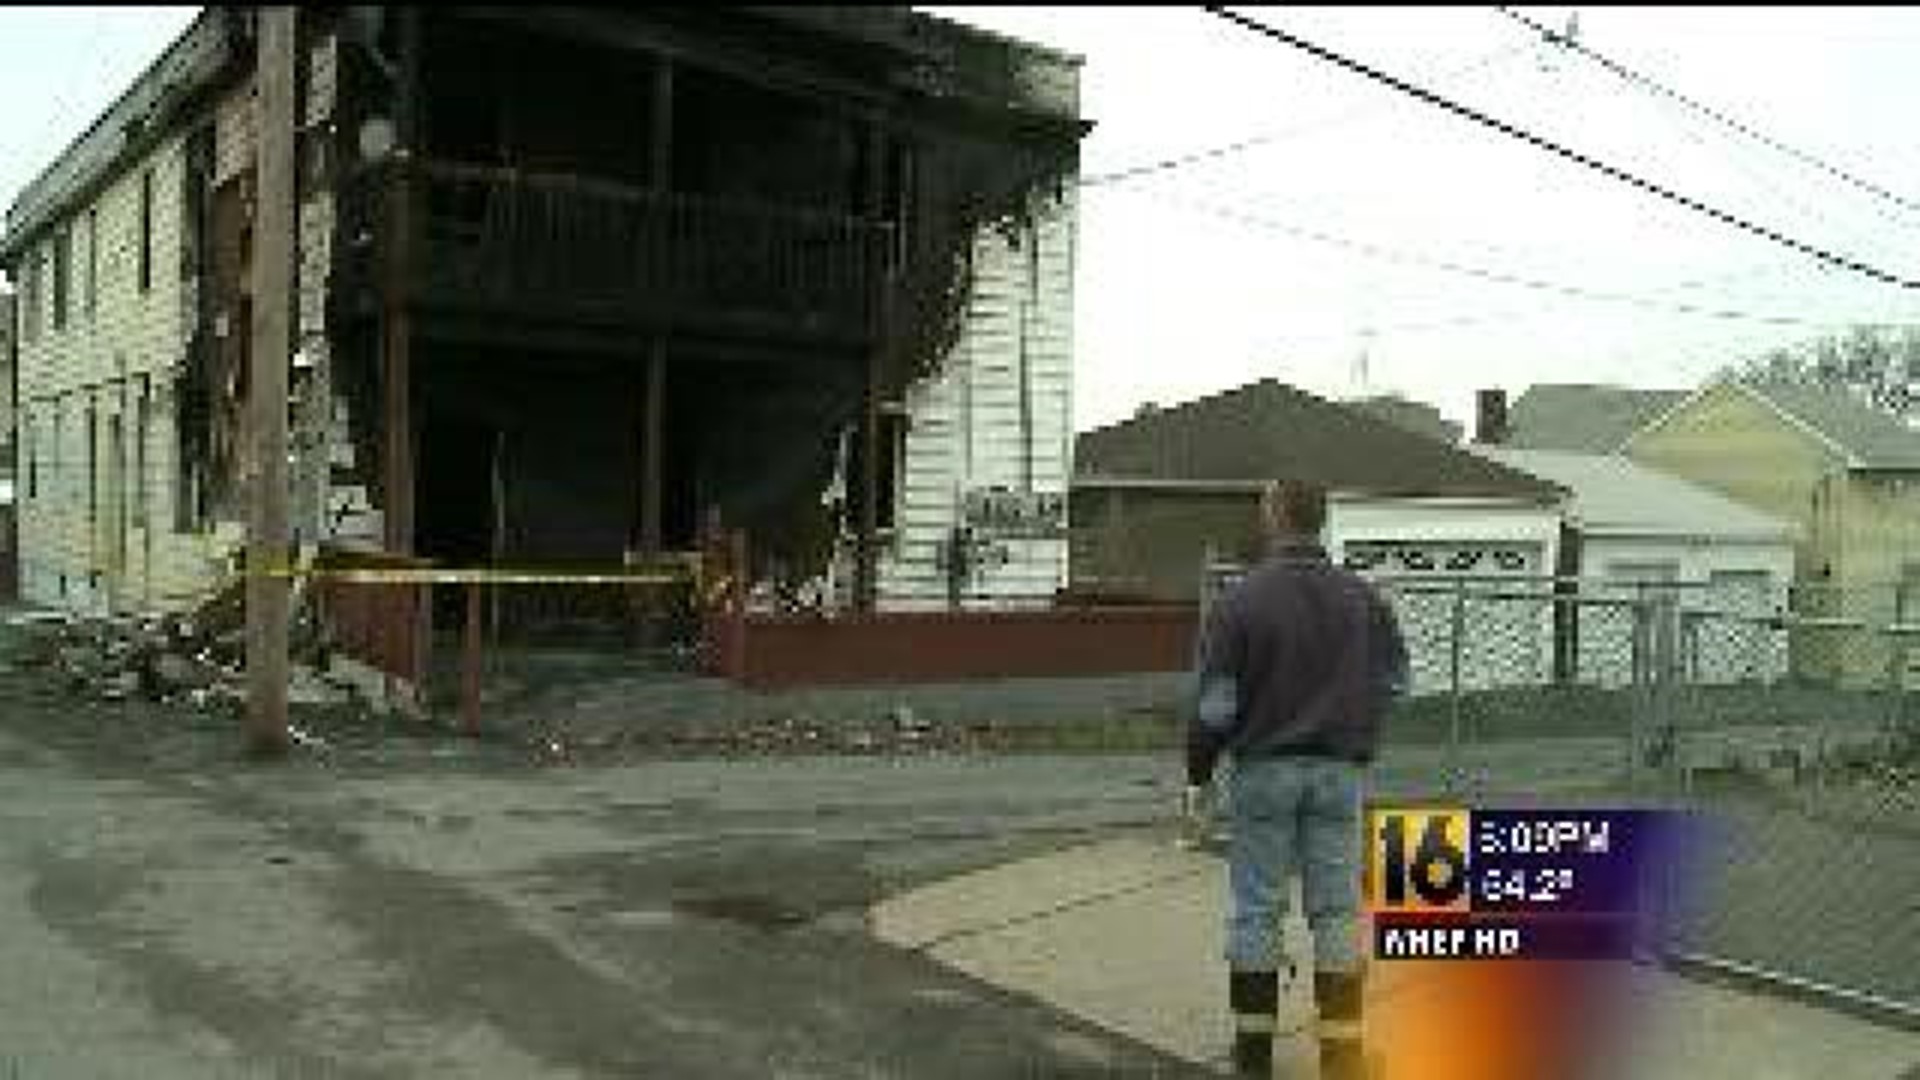 Apartment Building Fire Ruled Arson